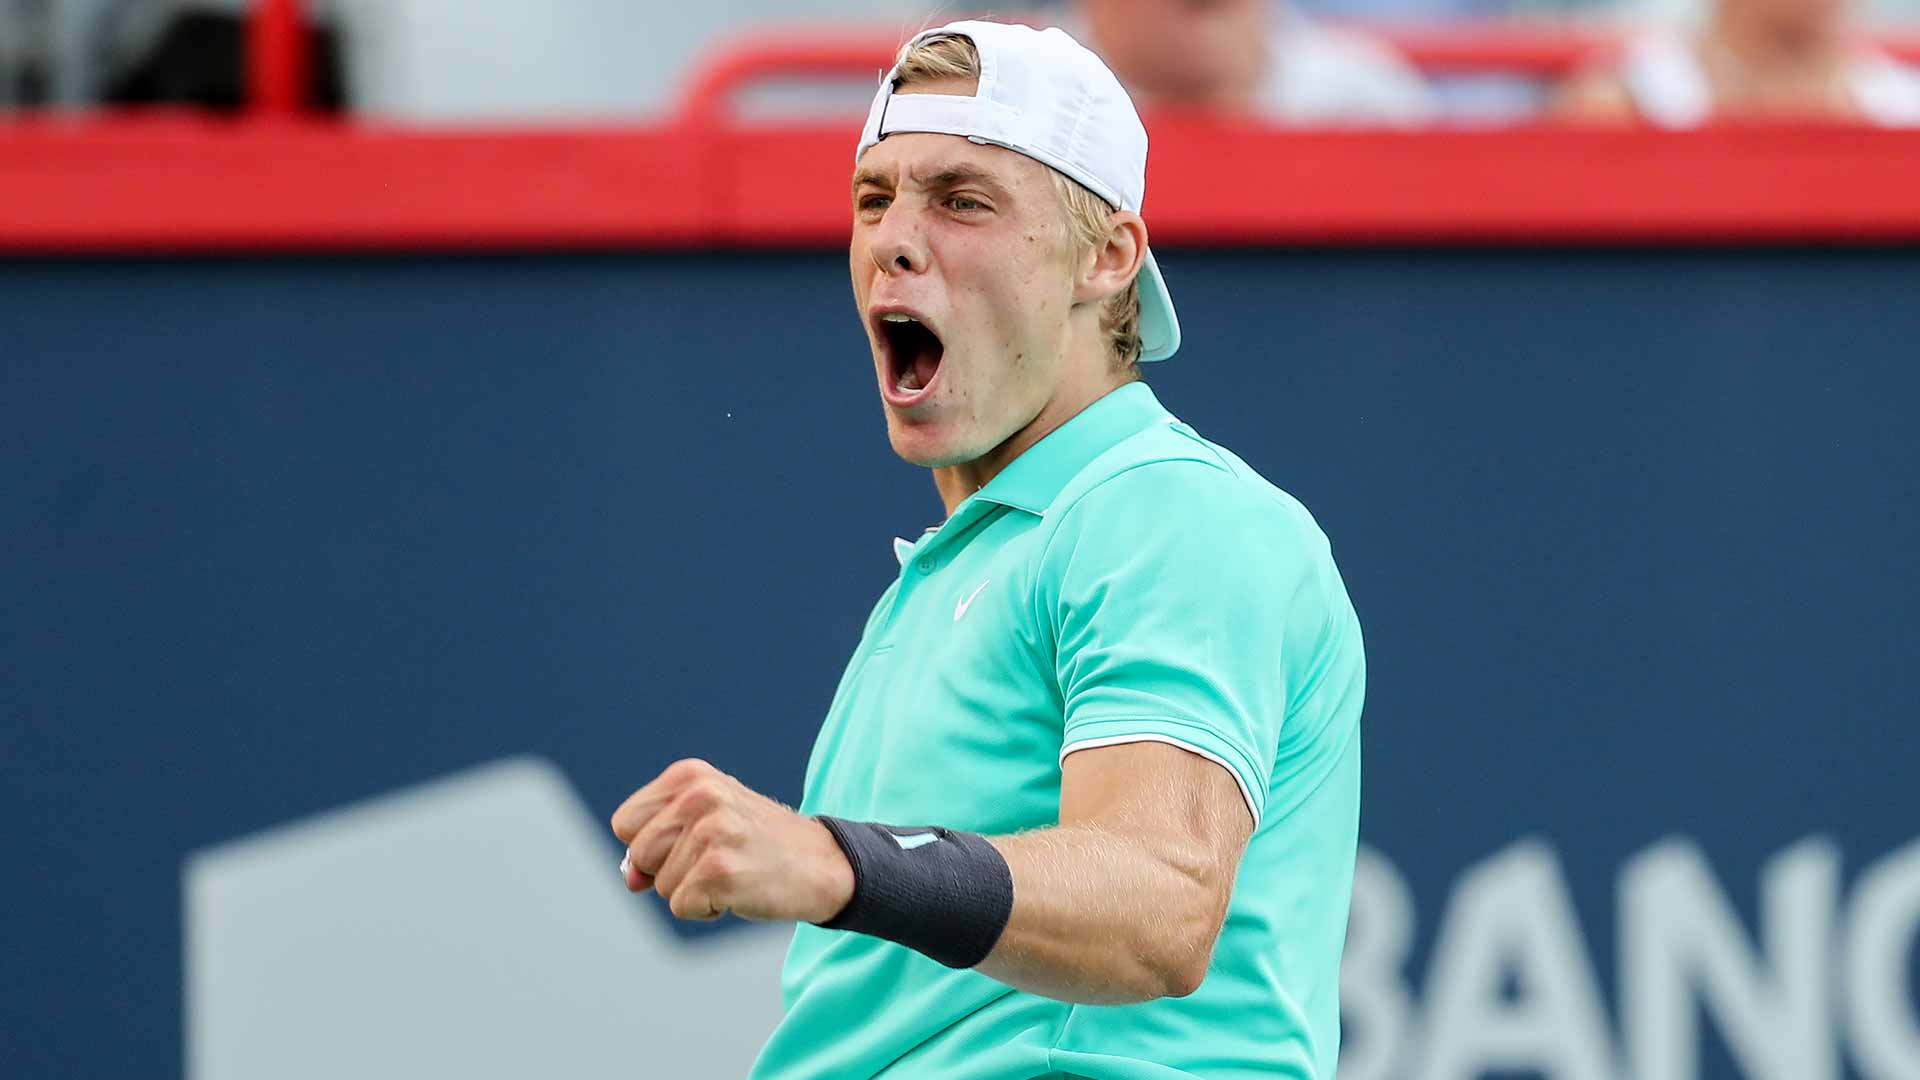 <a href='https://www.atptour.com/en/players/denis-shapovalov/su55/overview'>Denis Shapovalov</a> is looking to reach his fourth ATP Masters 1000 semi-final this week in Montreal.